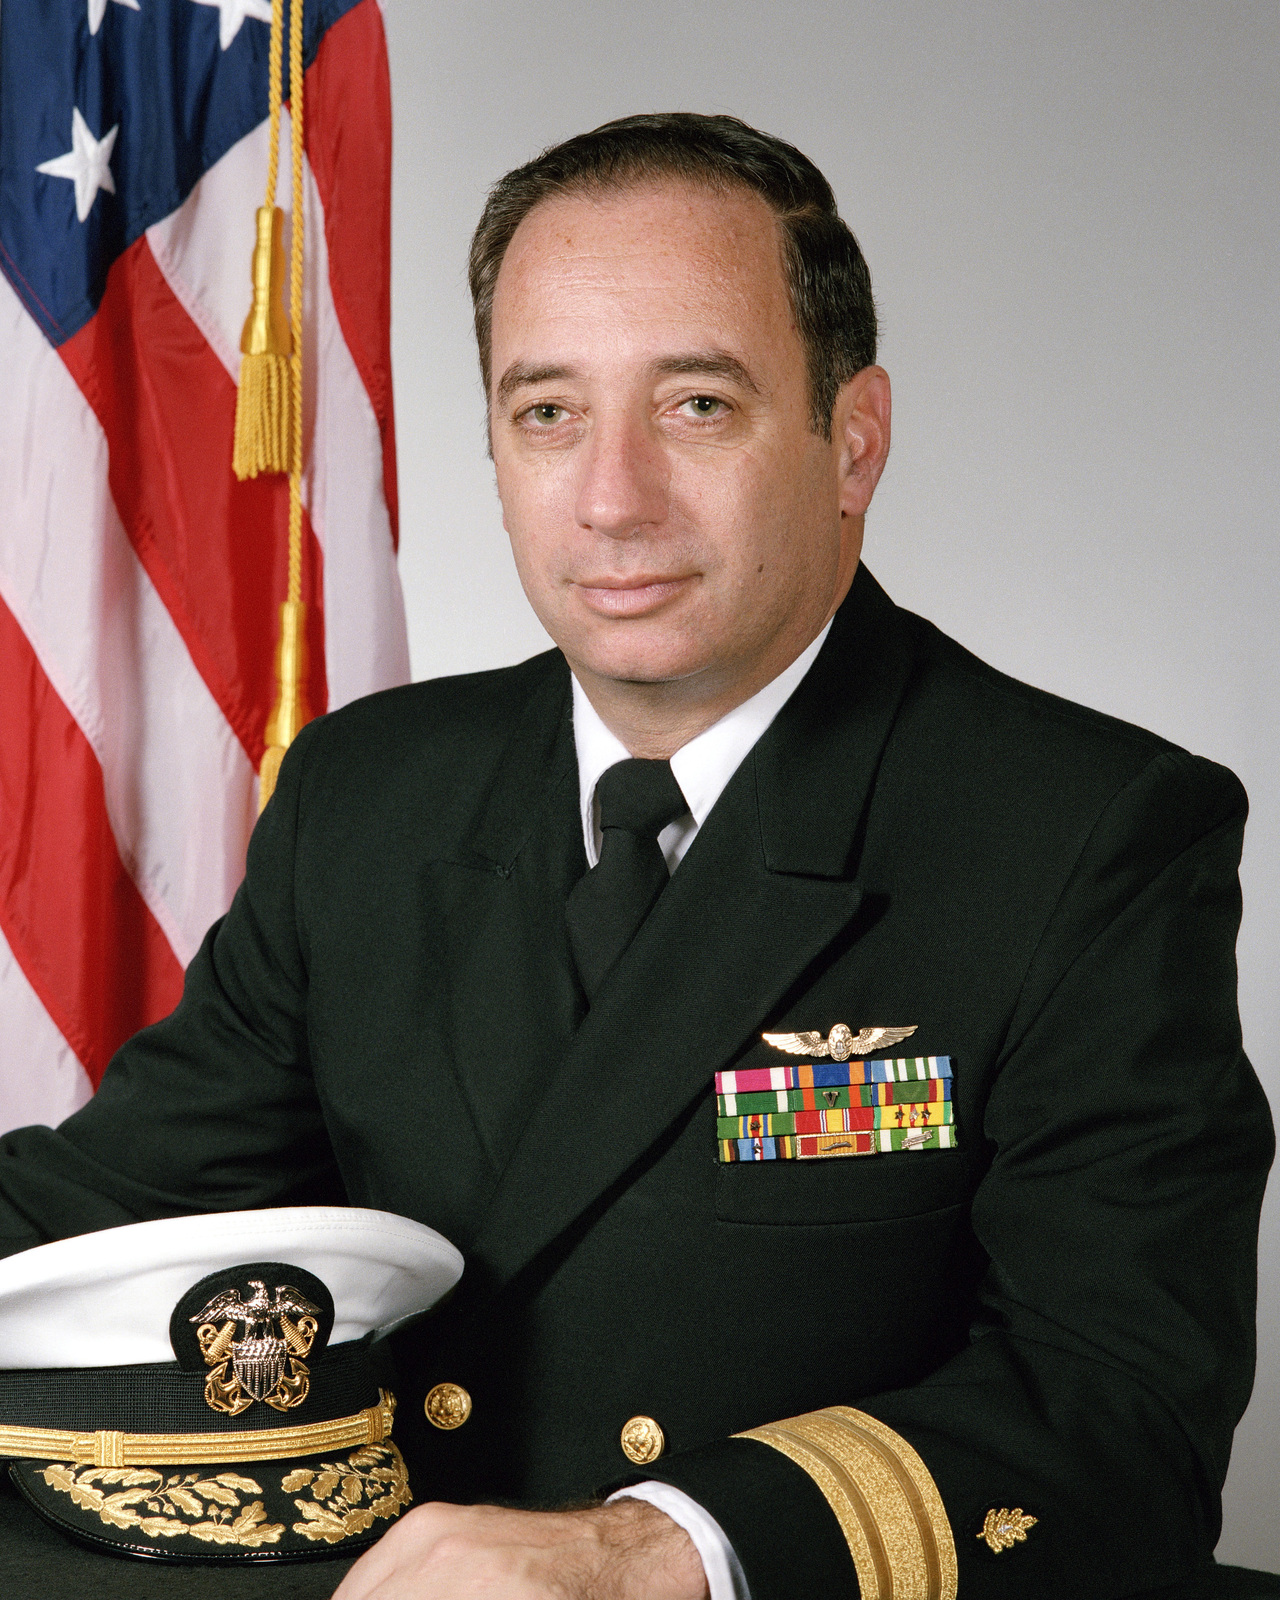 Commodore Lewis Mantel Usn Uncovered U S National Archives Public Domain Image